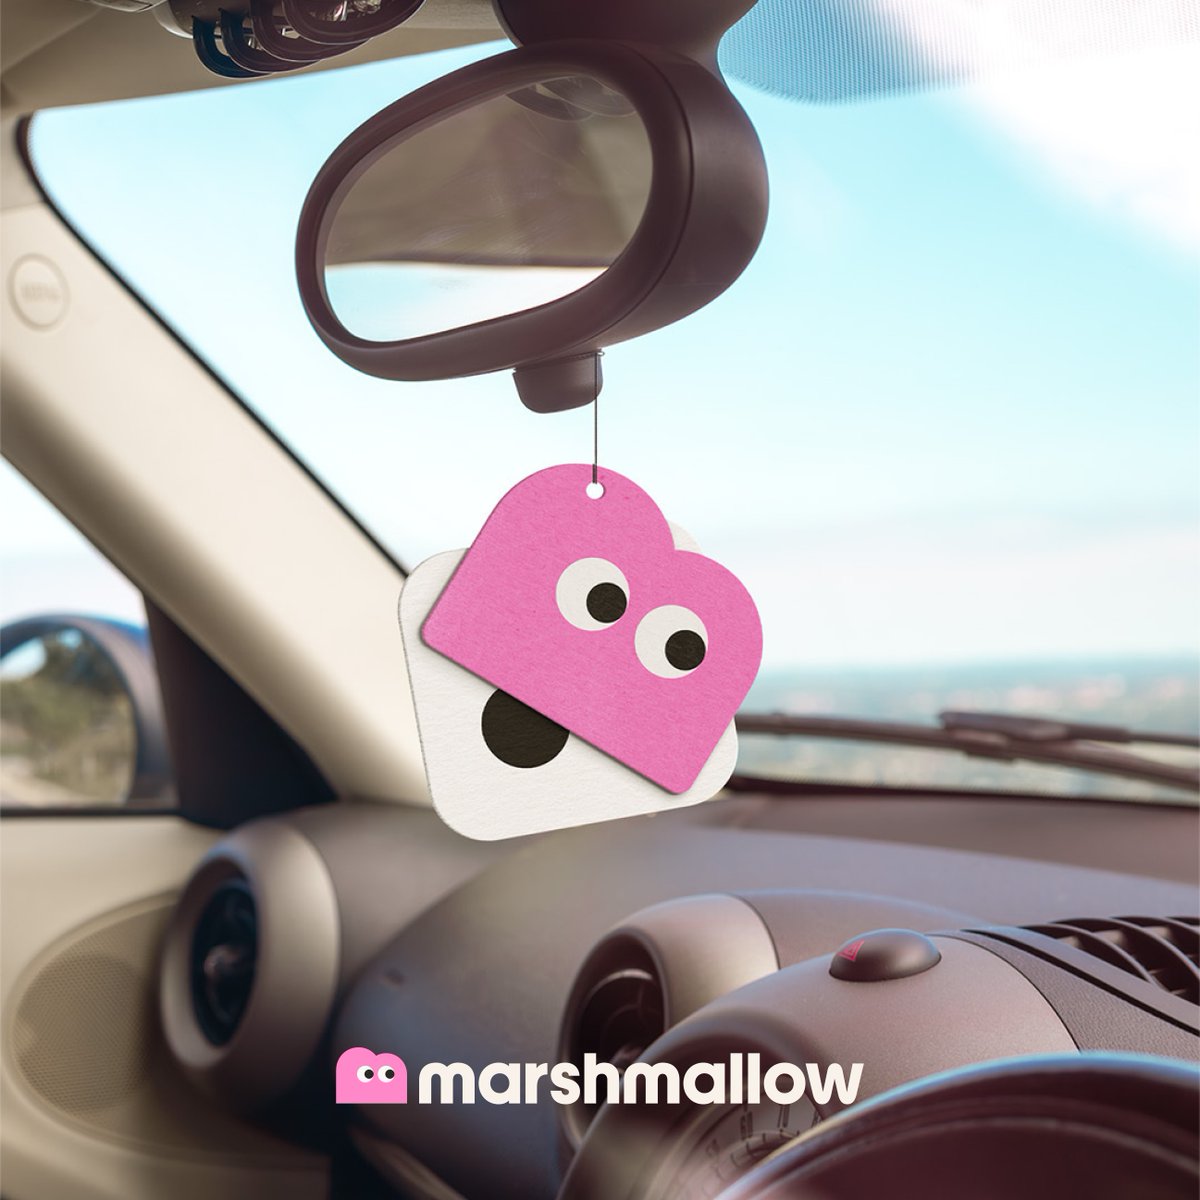 Marshmallow helps UK newcomers get fairer, more affordable car insurance. Named Europe’s 2nd fastest-growing company by the Financial Times in 2023, they’re growing rapidly in London and Budapest! Find out more here: youtu.be/lgE7SnJ0WiQ?si…